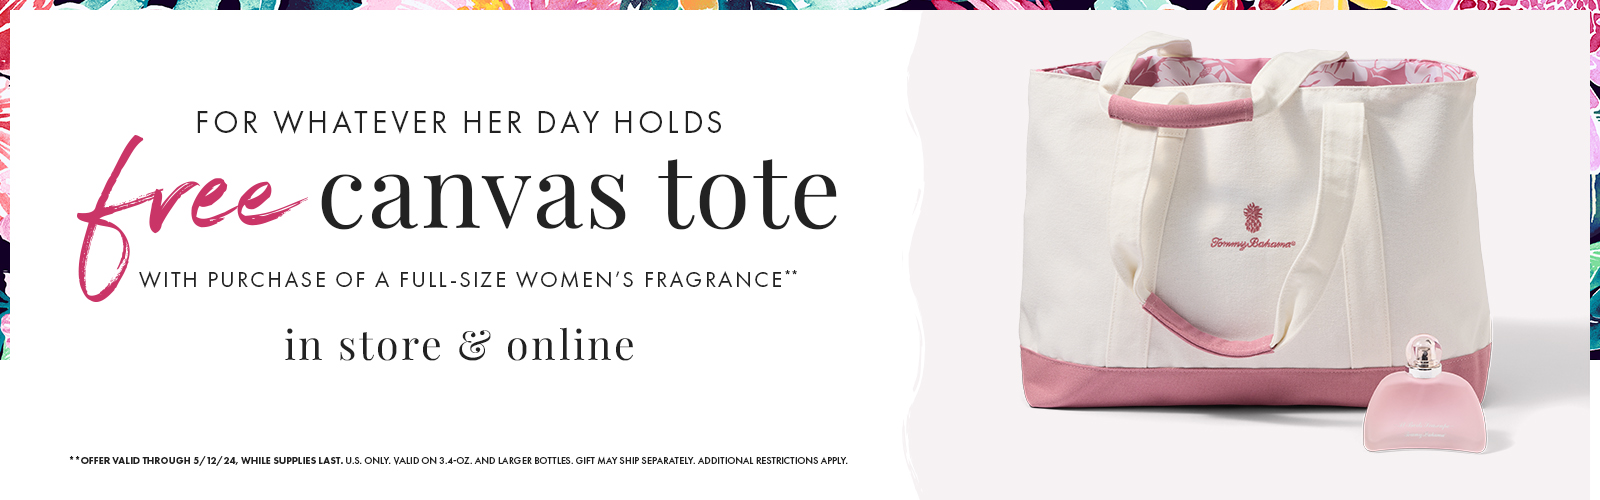 FREE CANVAS TOTE BAG with purchase of a full-size women's fragrance